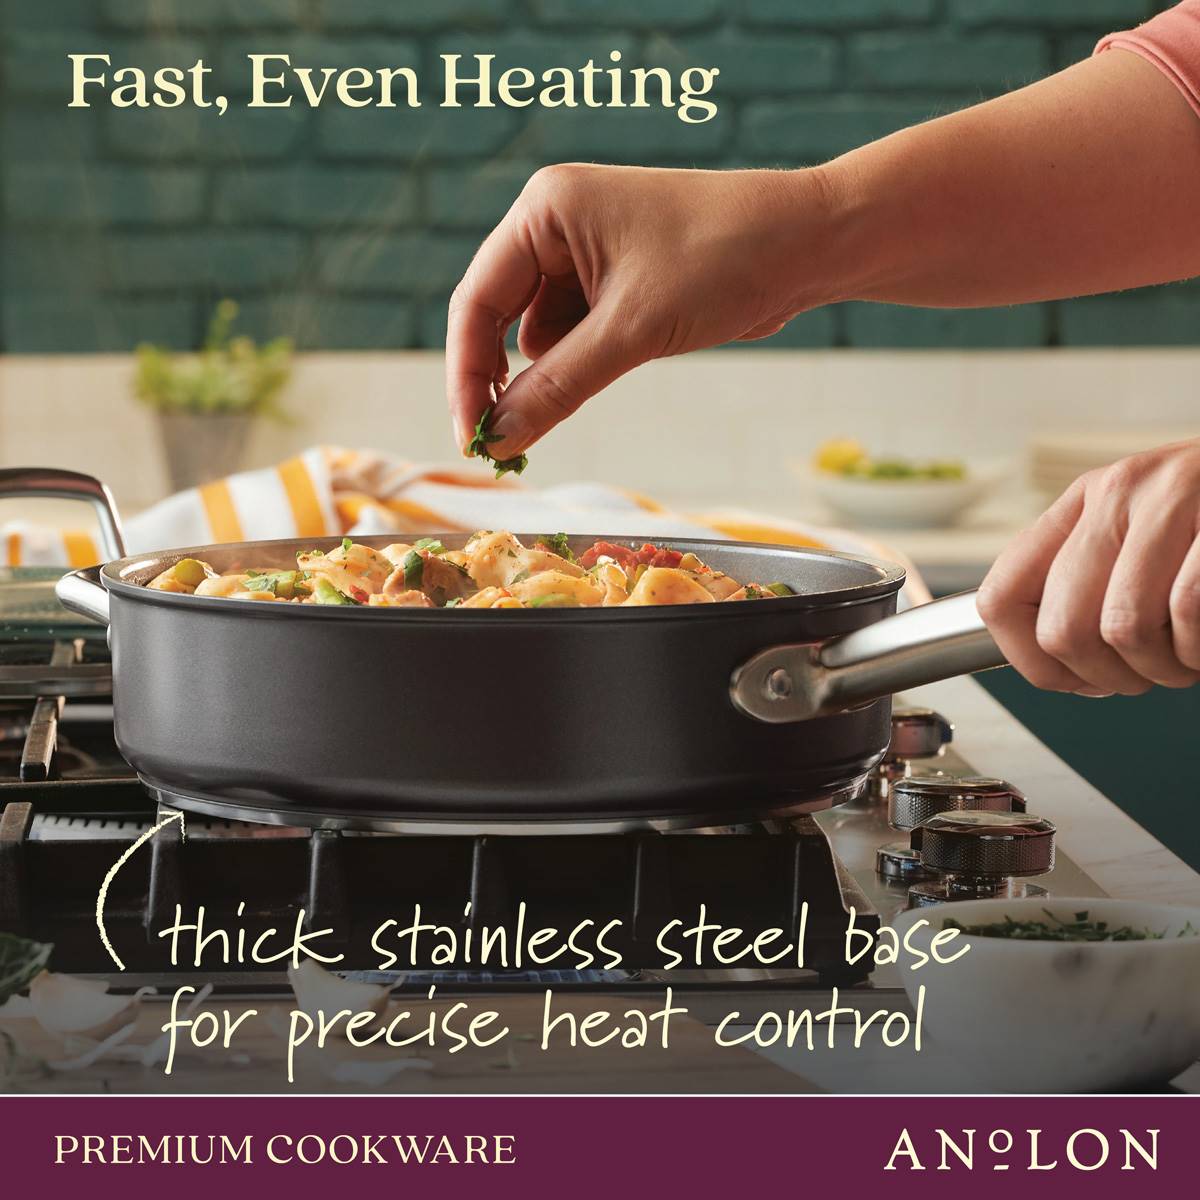 Anolon(R) Accolade 10pc. Hard-Anodized Nonstick Cookware Set